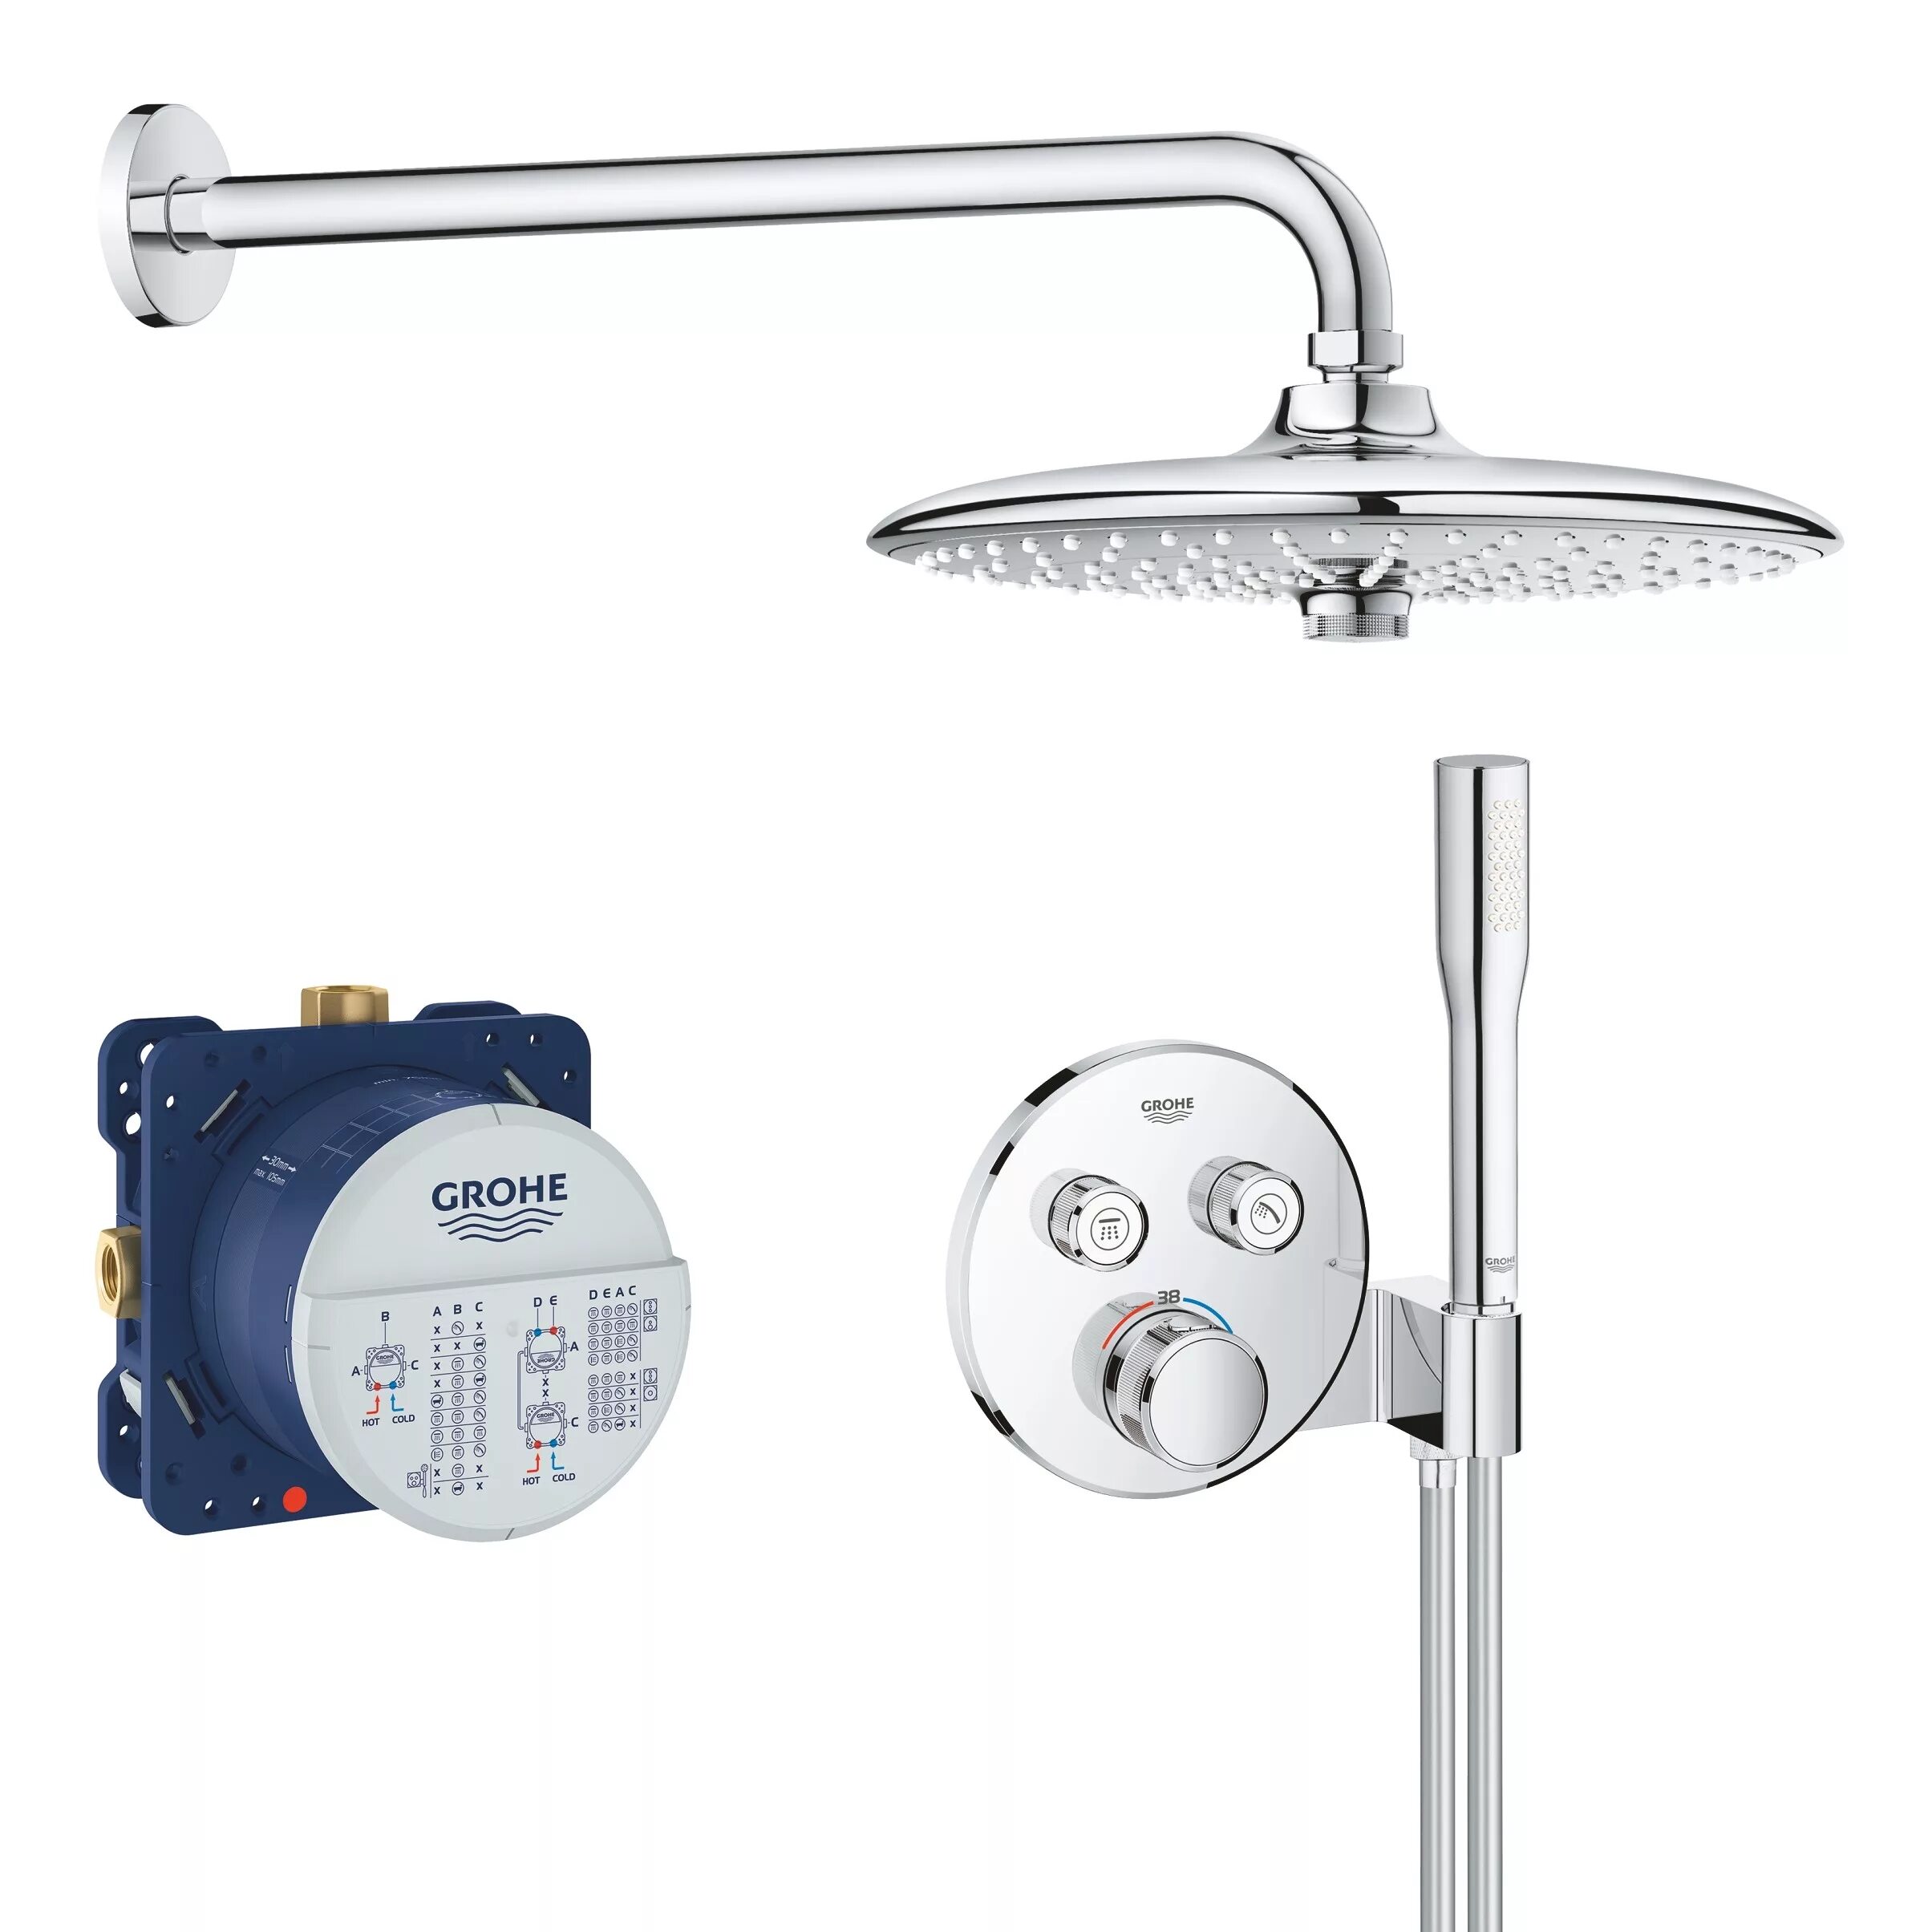 Душа grohe grohtherm. Grohe Grohtherm SMARTCONTROL 34744000. Grohe Grohtherm 34727000. Grohe Grohtherm SMARTCONTROL. 34741000 Grohe.